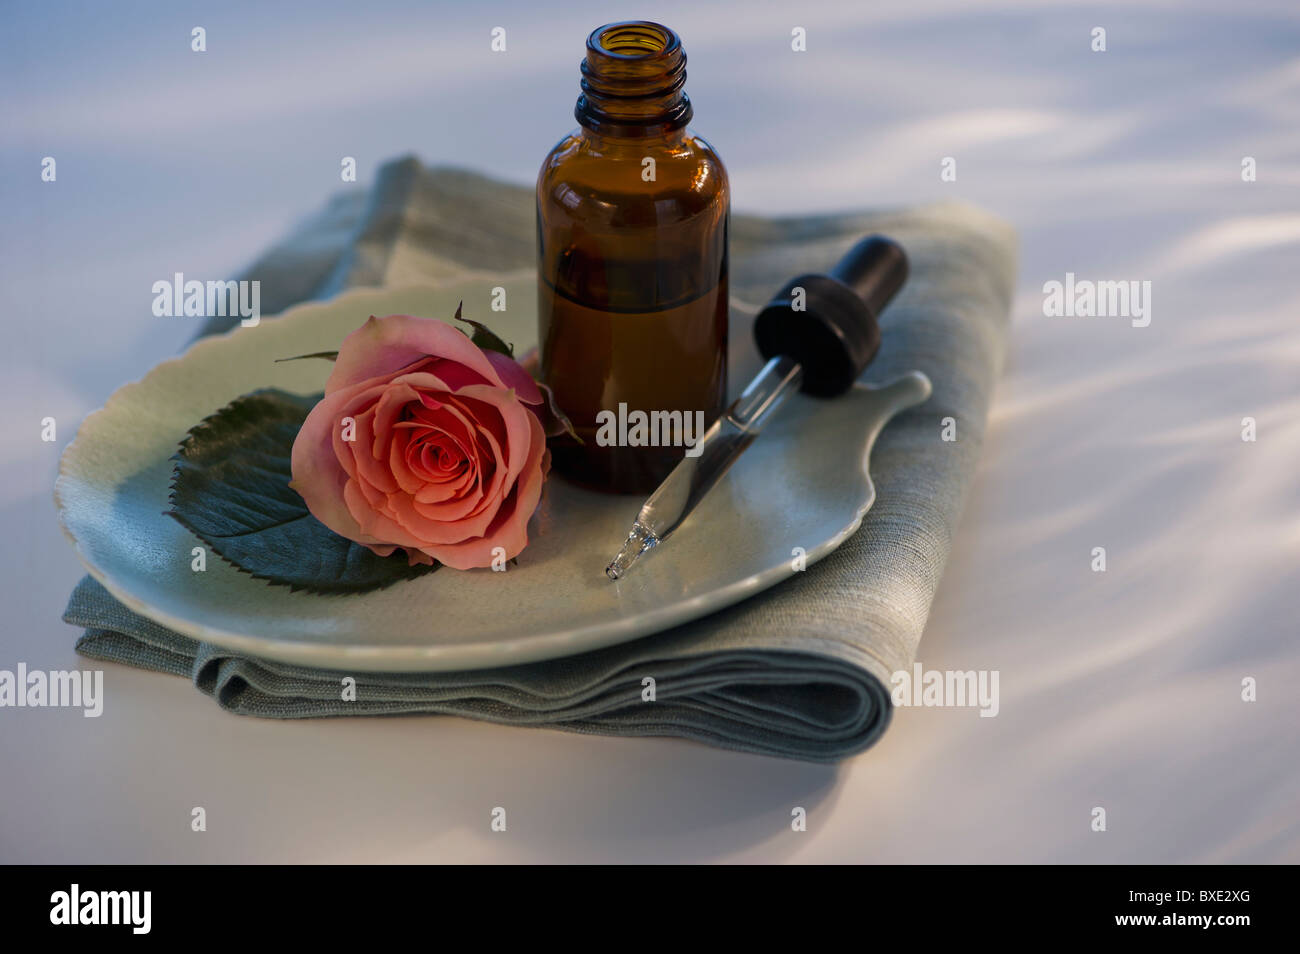 Essential oil and rose on tray Stock Photo